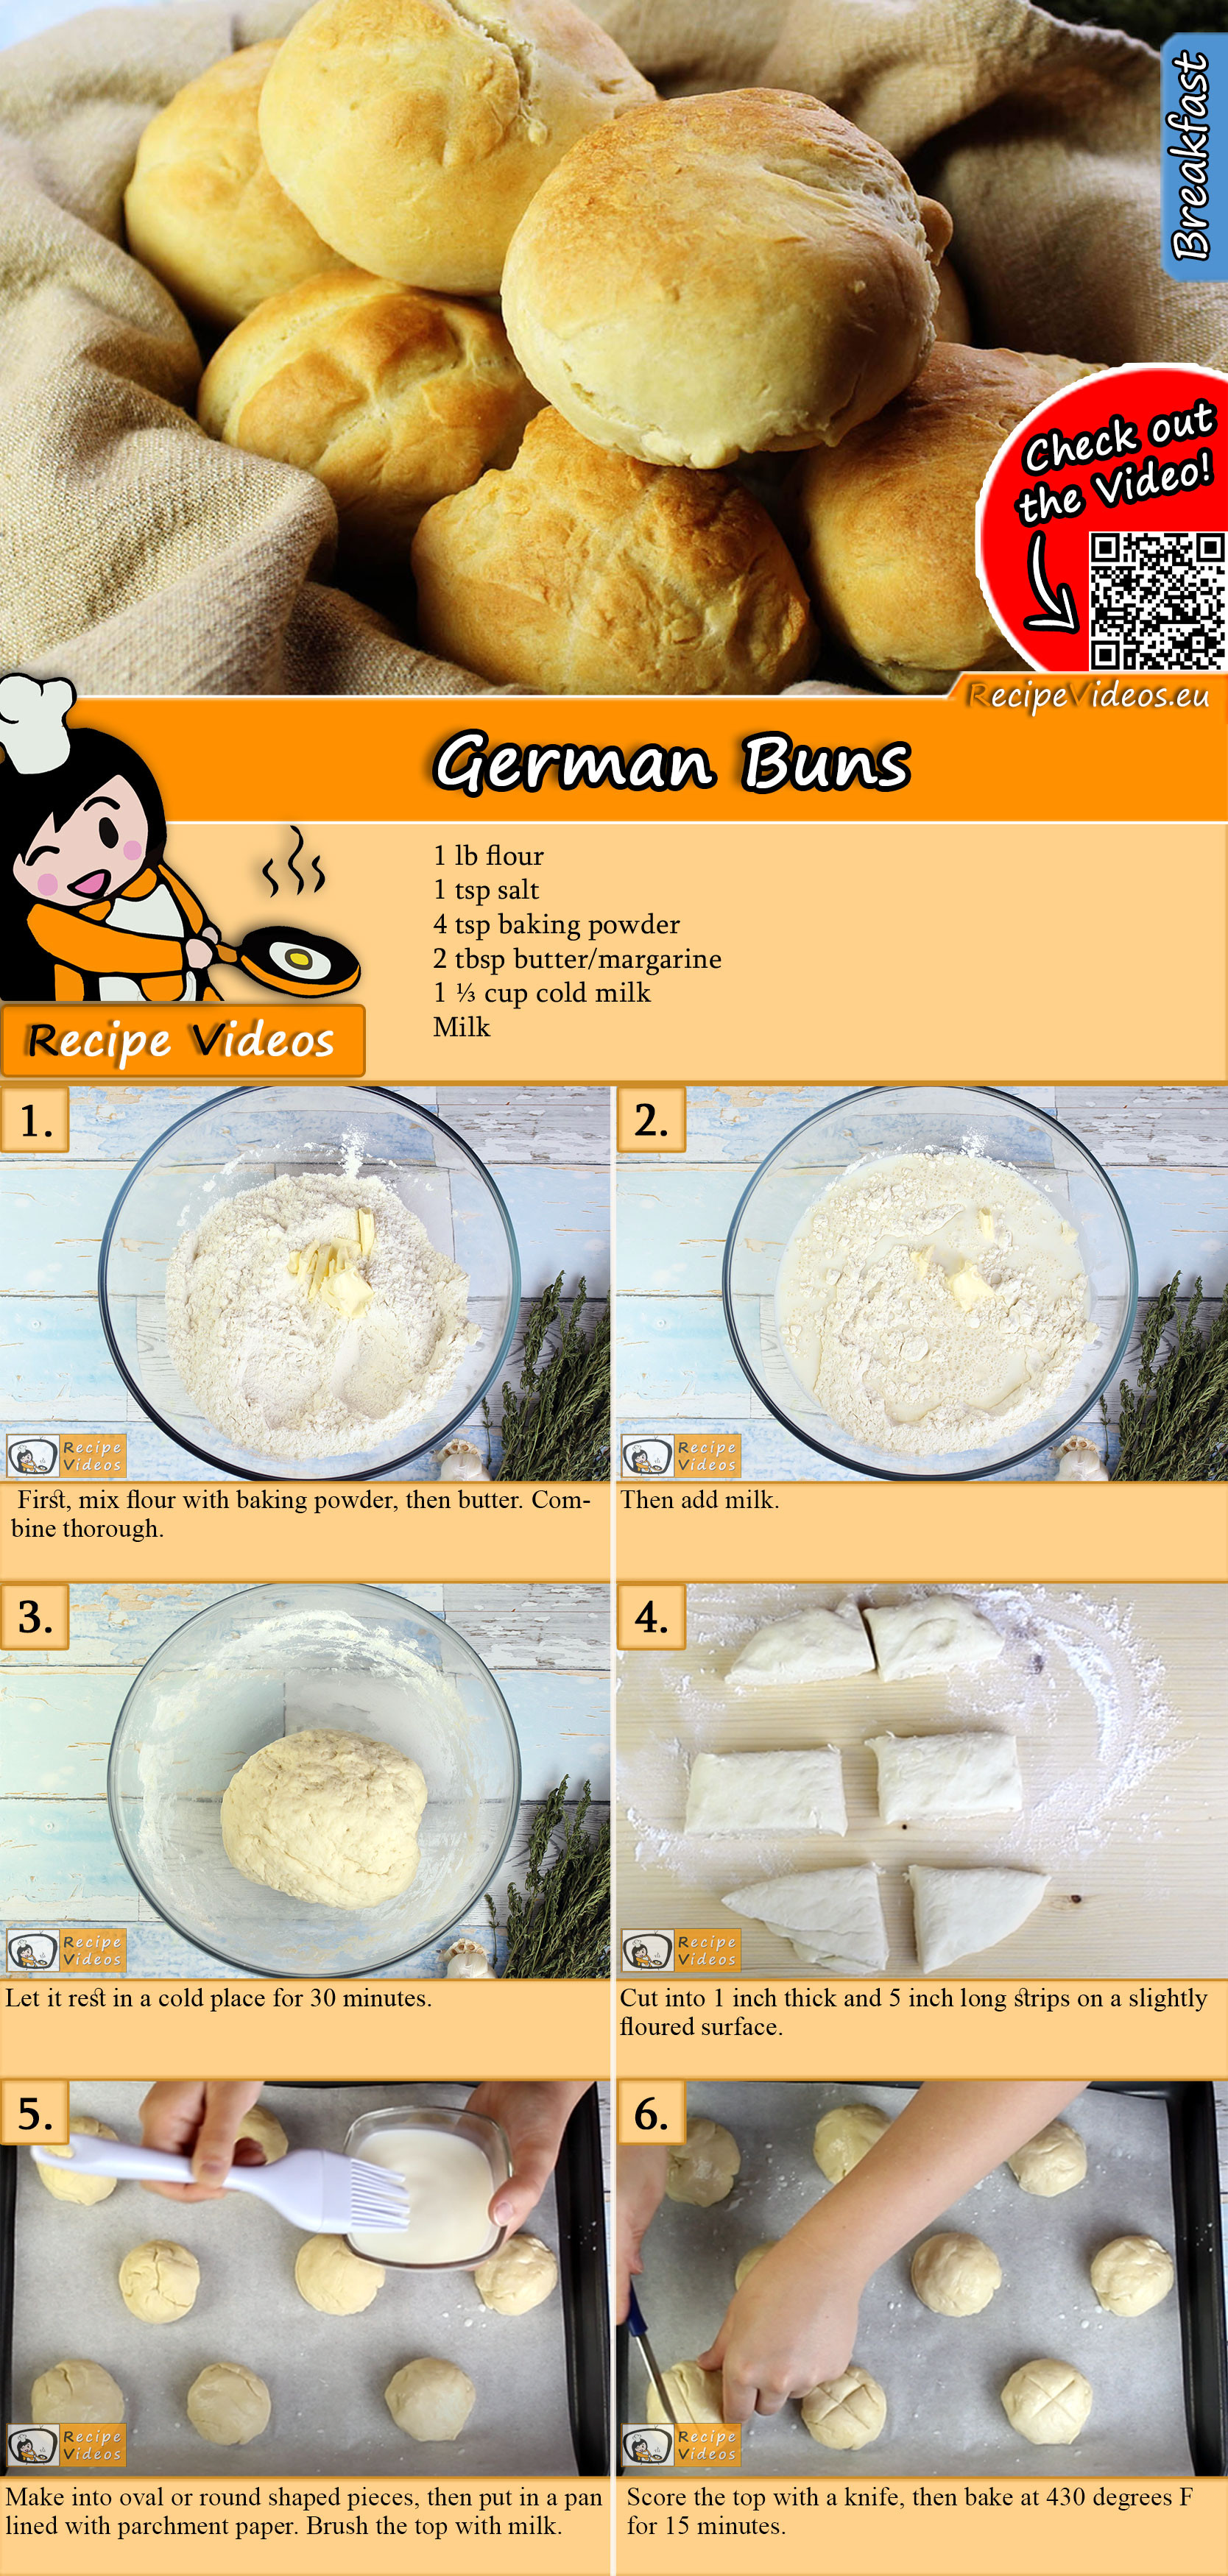 German Buns recipe with video